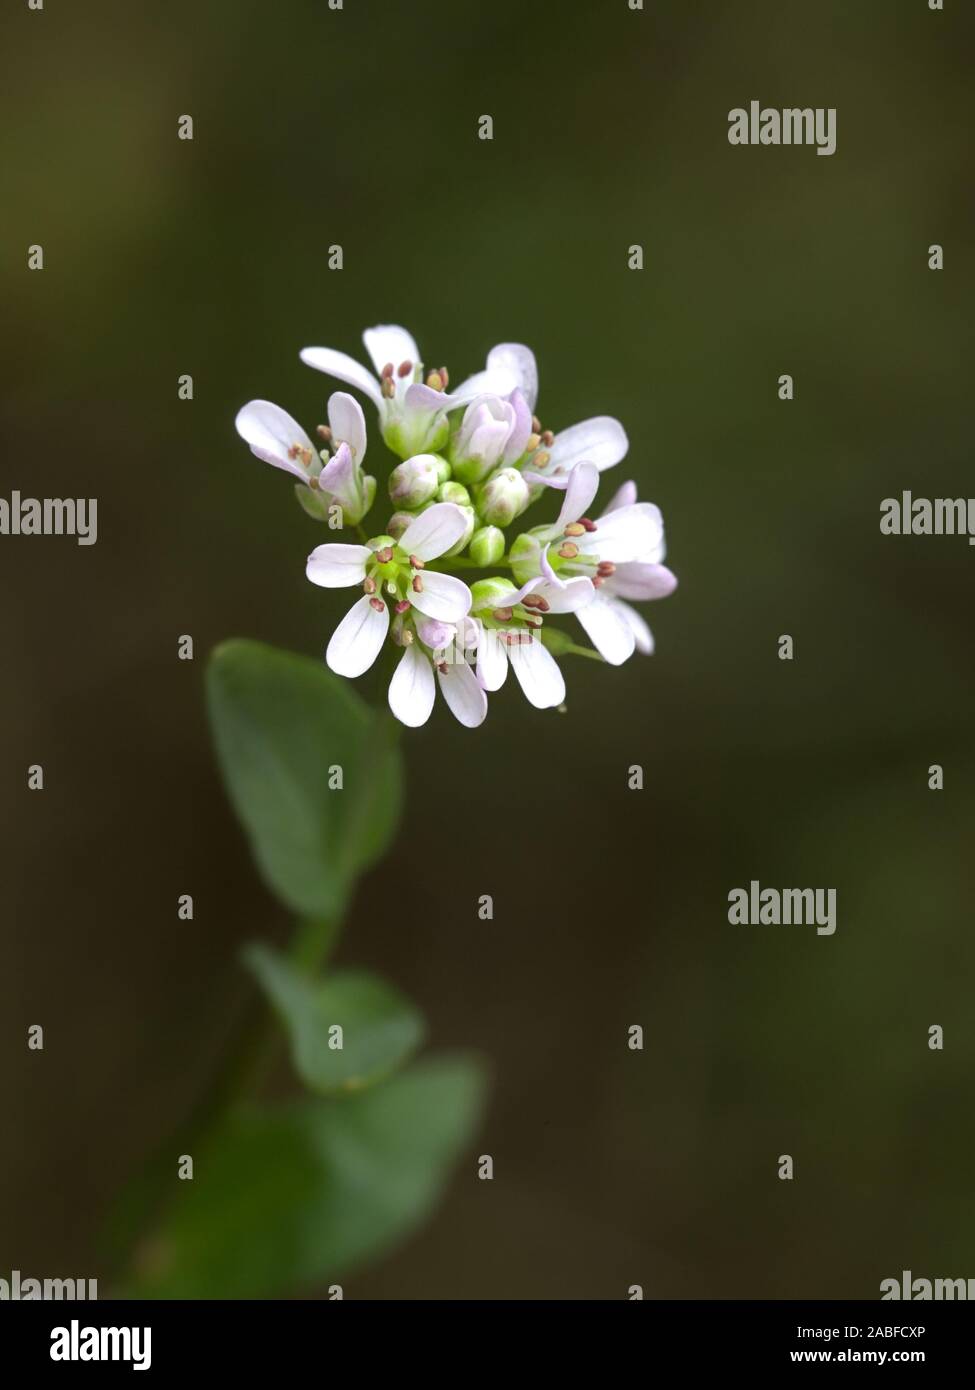 Thlaspi caerulescens, known as Alpine Penny-cress or alpine pennygrass, wild flower from Finland Stock Photo